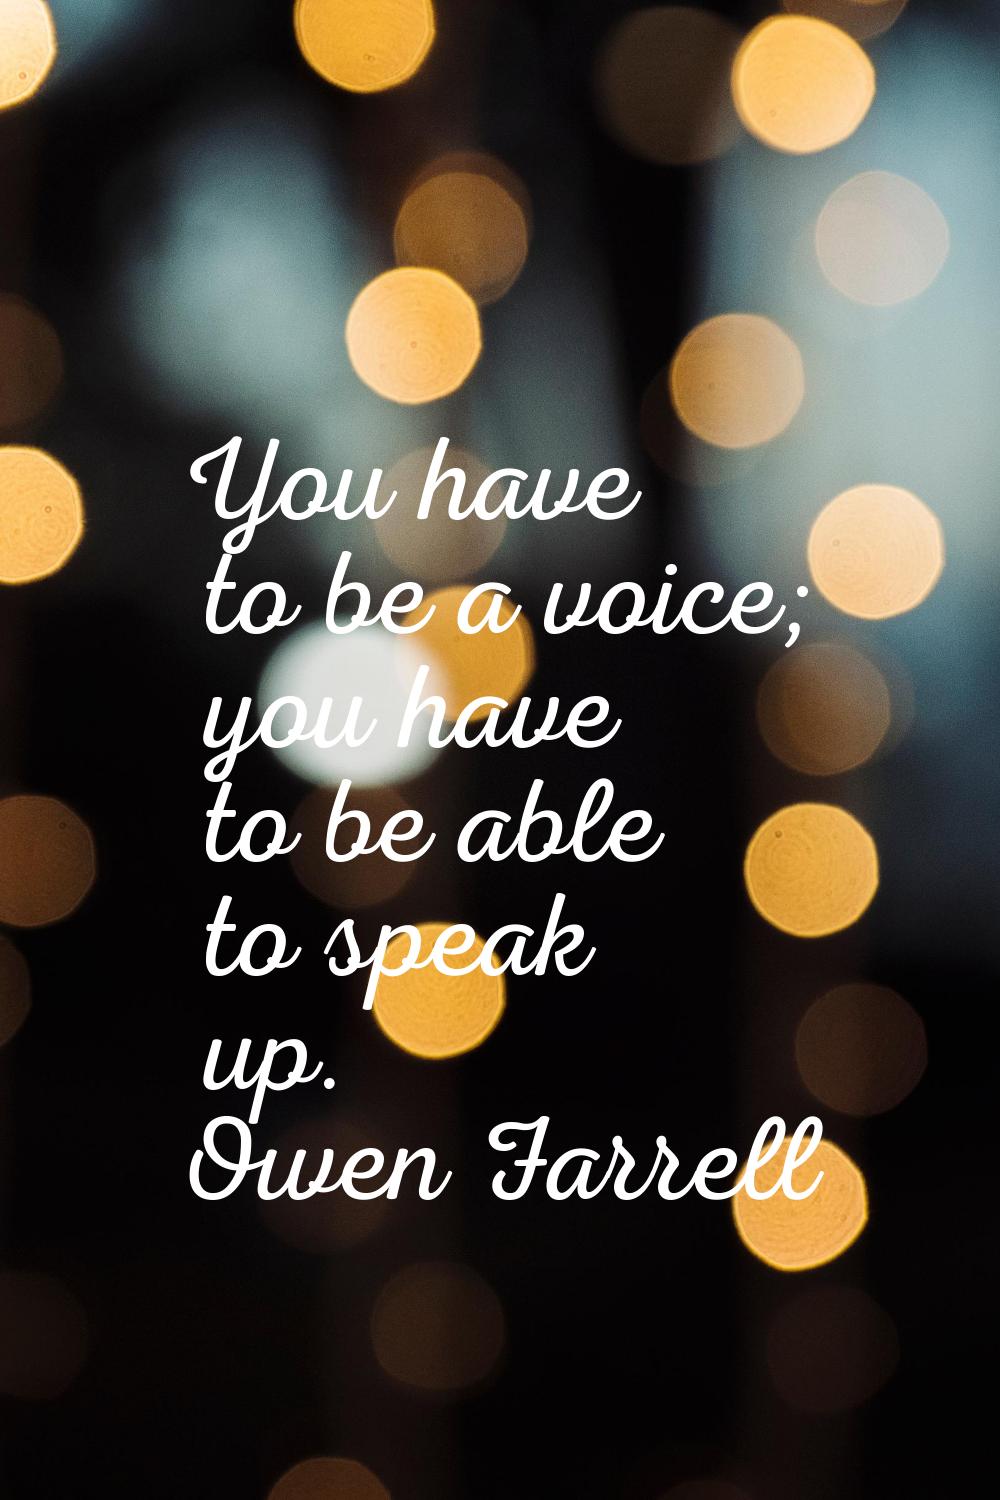 You have to be a voice; you have to be able to speak up.